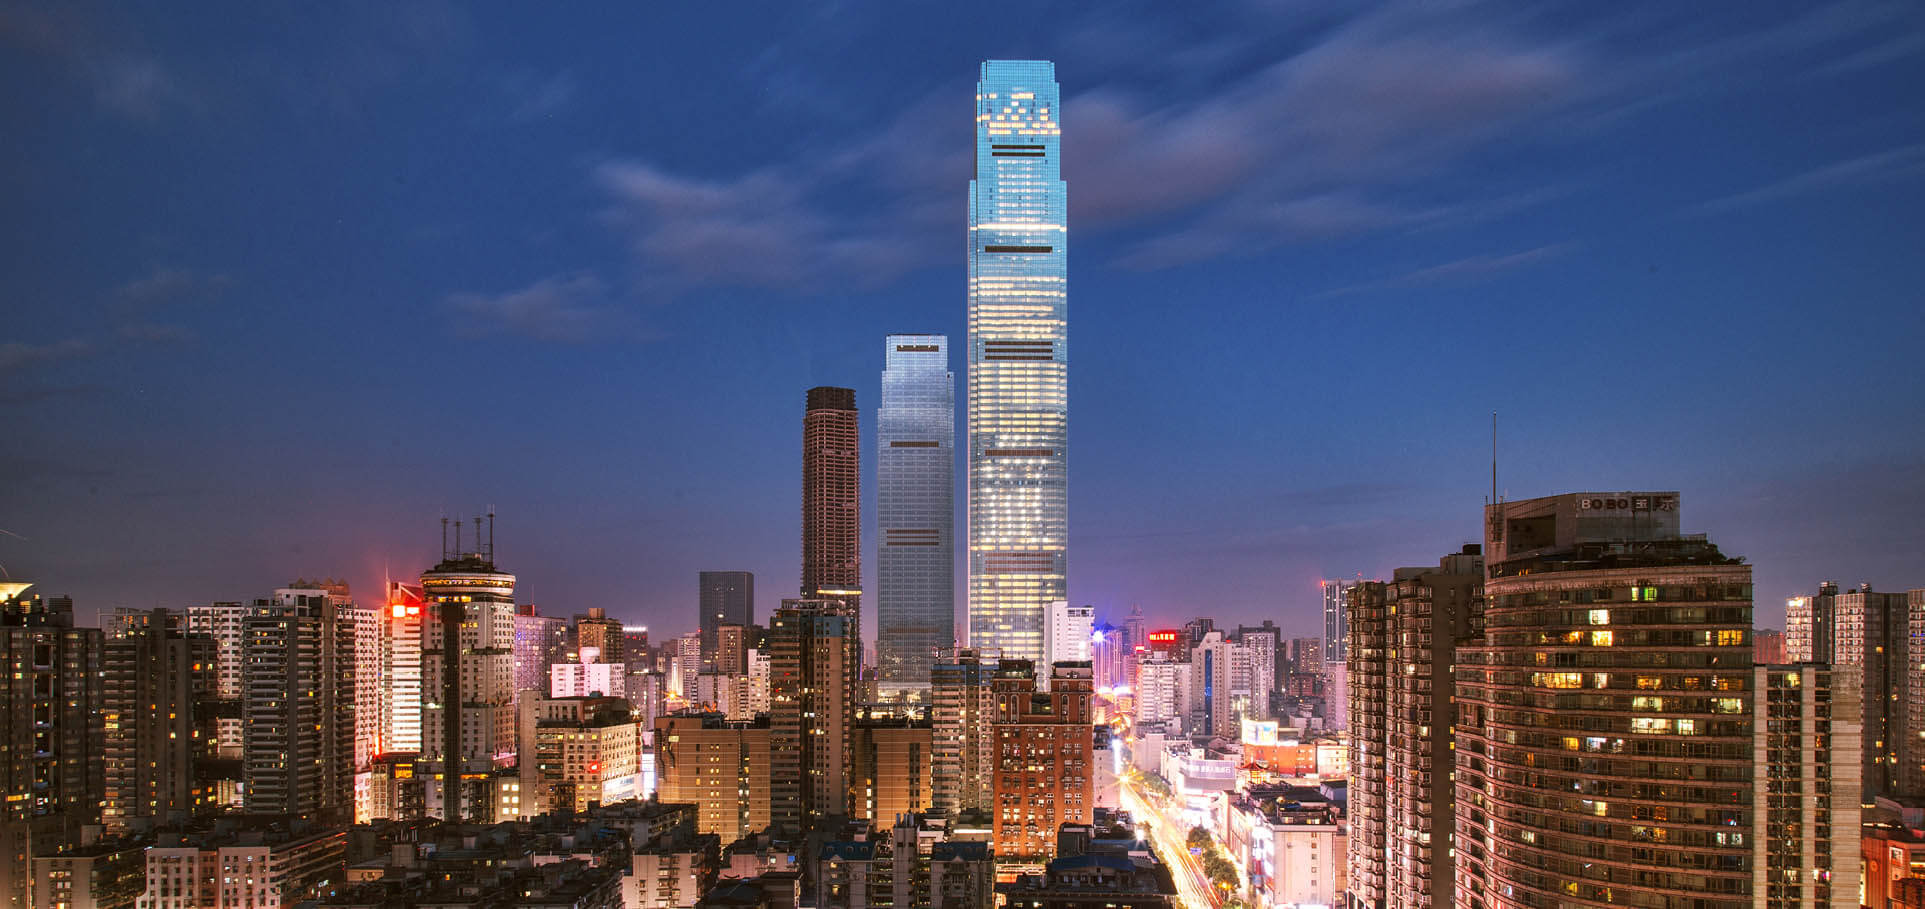 IFS tower T1 in changsha